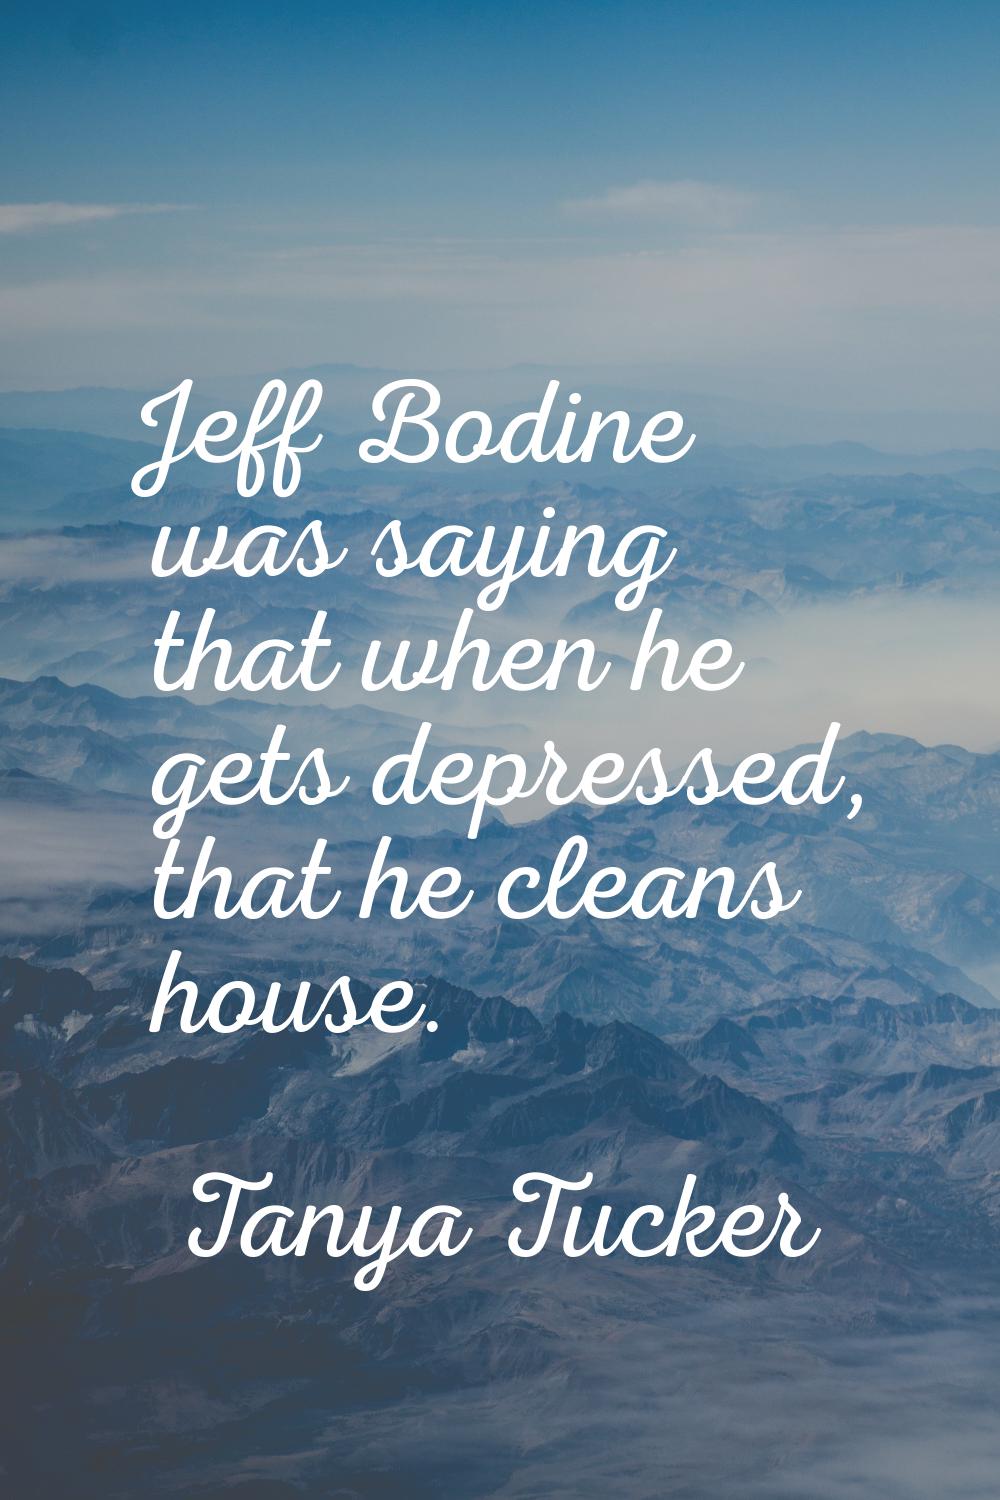 Jeff Bodine was saying that when he gets depressed, that he cleans house.